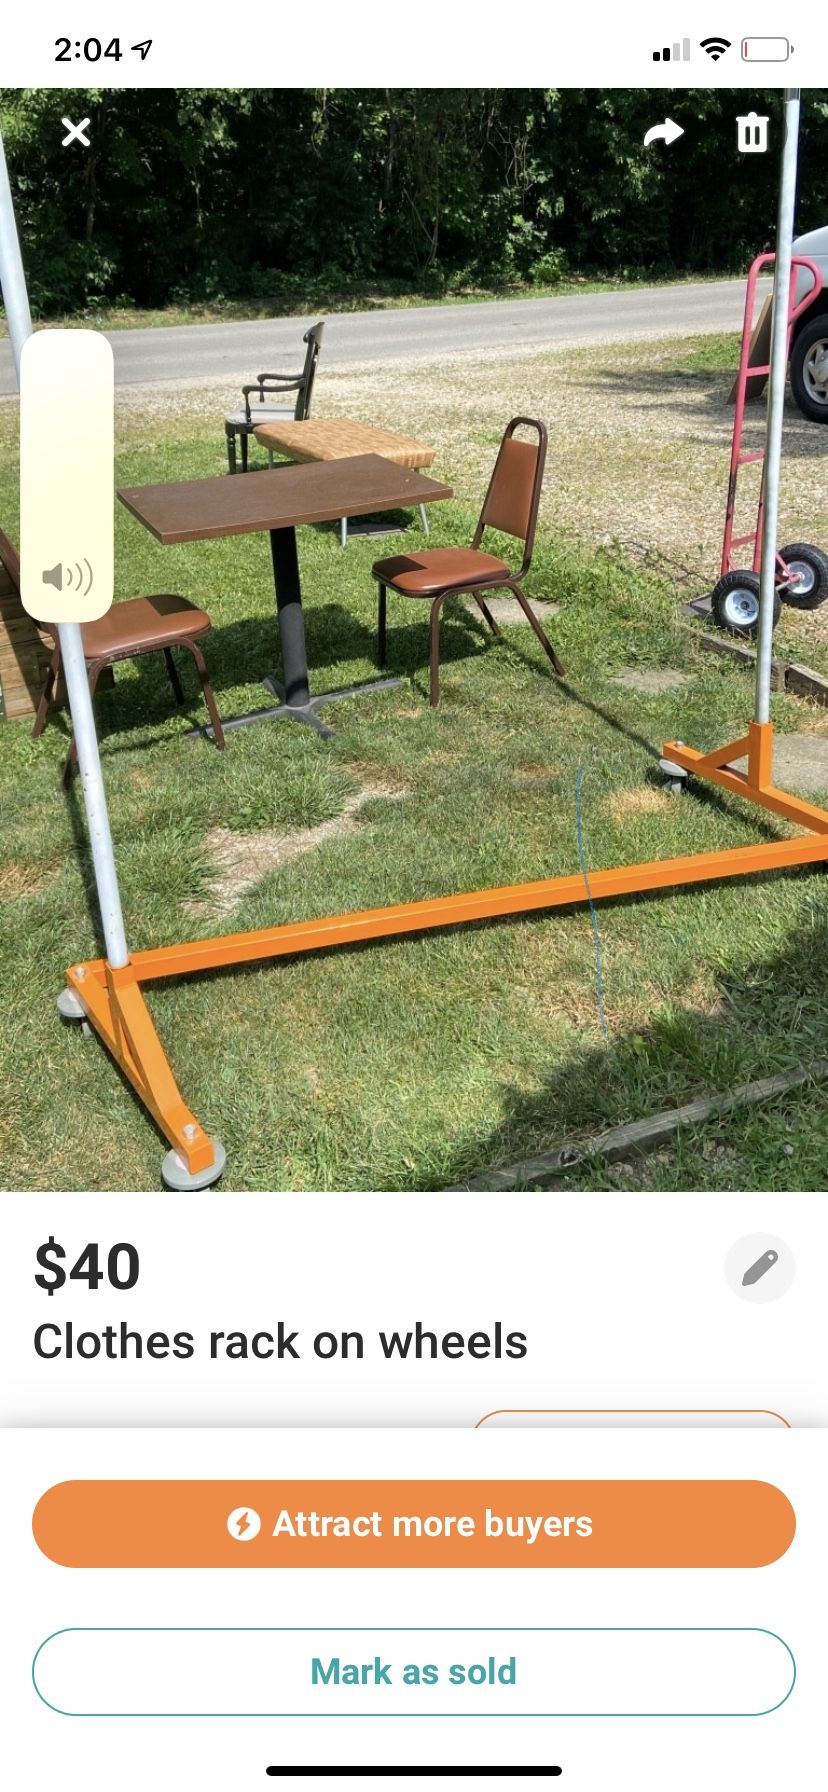 Clothes rack on wheels